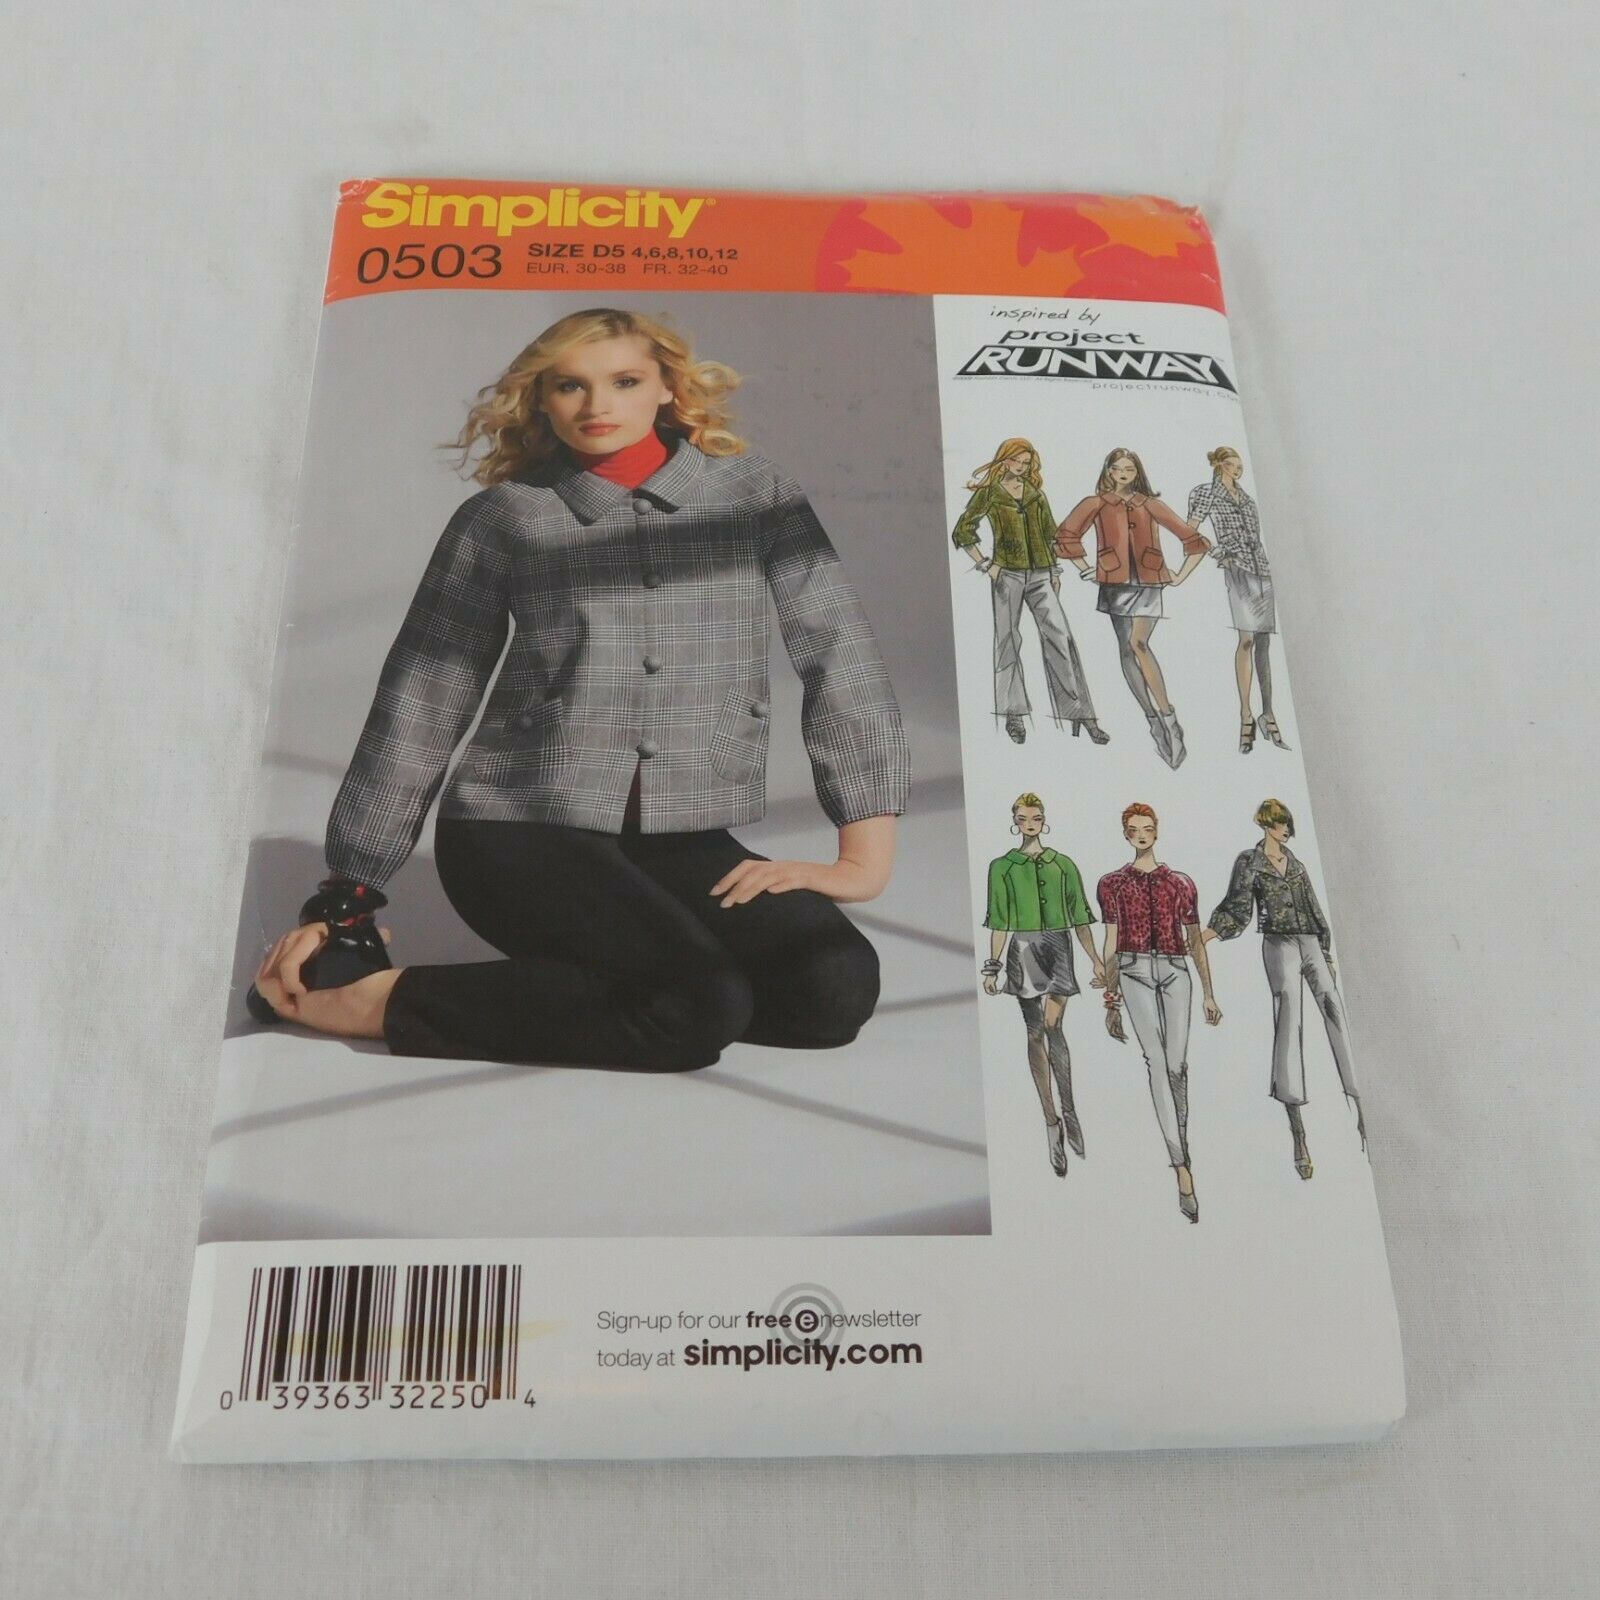 Primary image for Simplicity 0503 Sewing Pattern Misses Jacket Project Runway Sizes 4 6 8 10 12